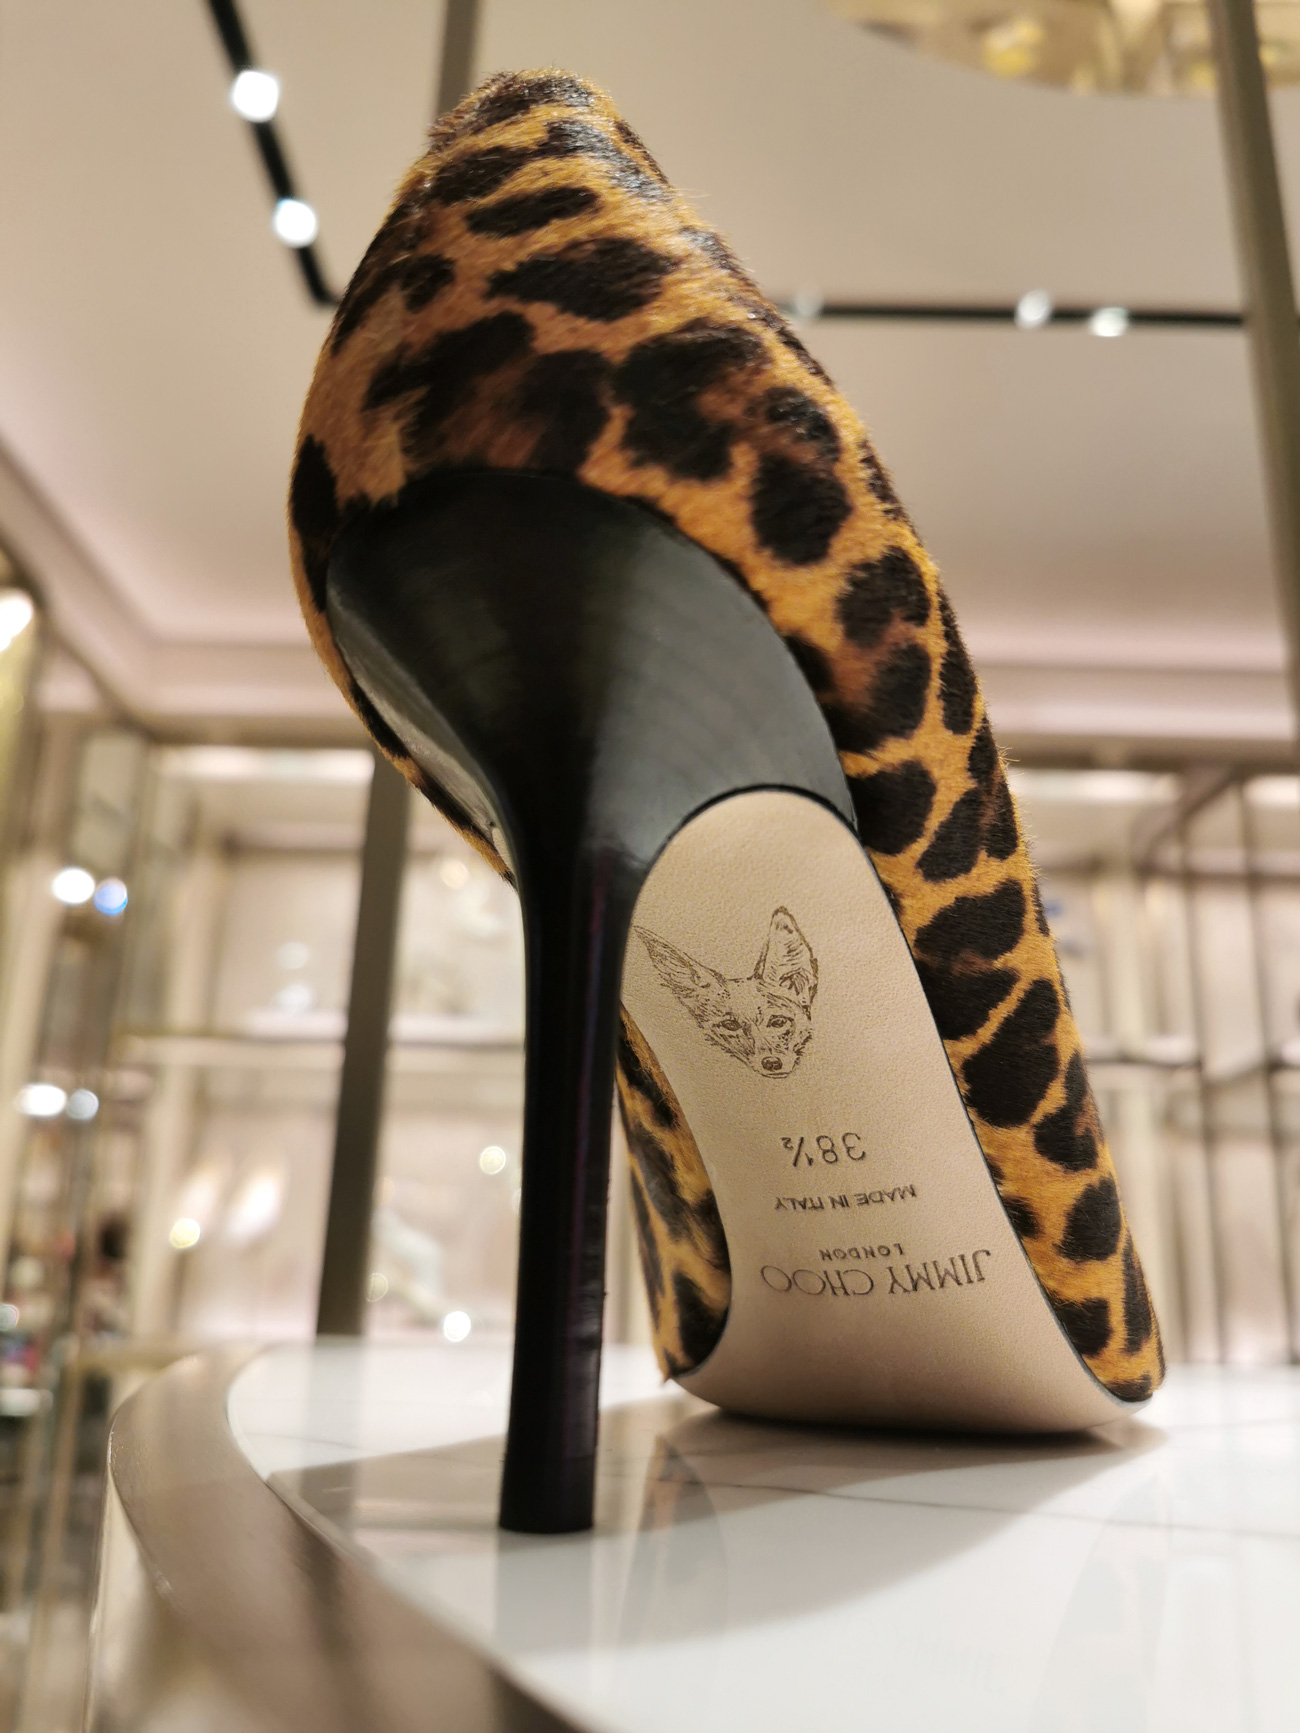 Art hand painted live under the Jimmy Choo shoe during a special event